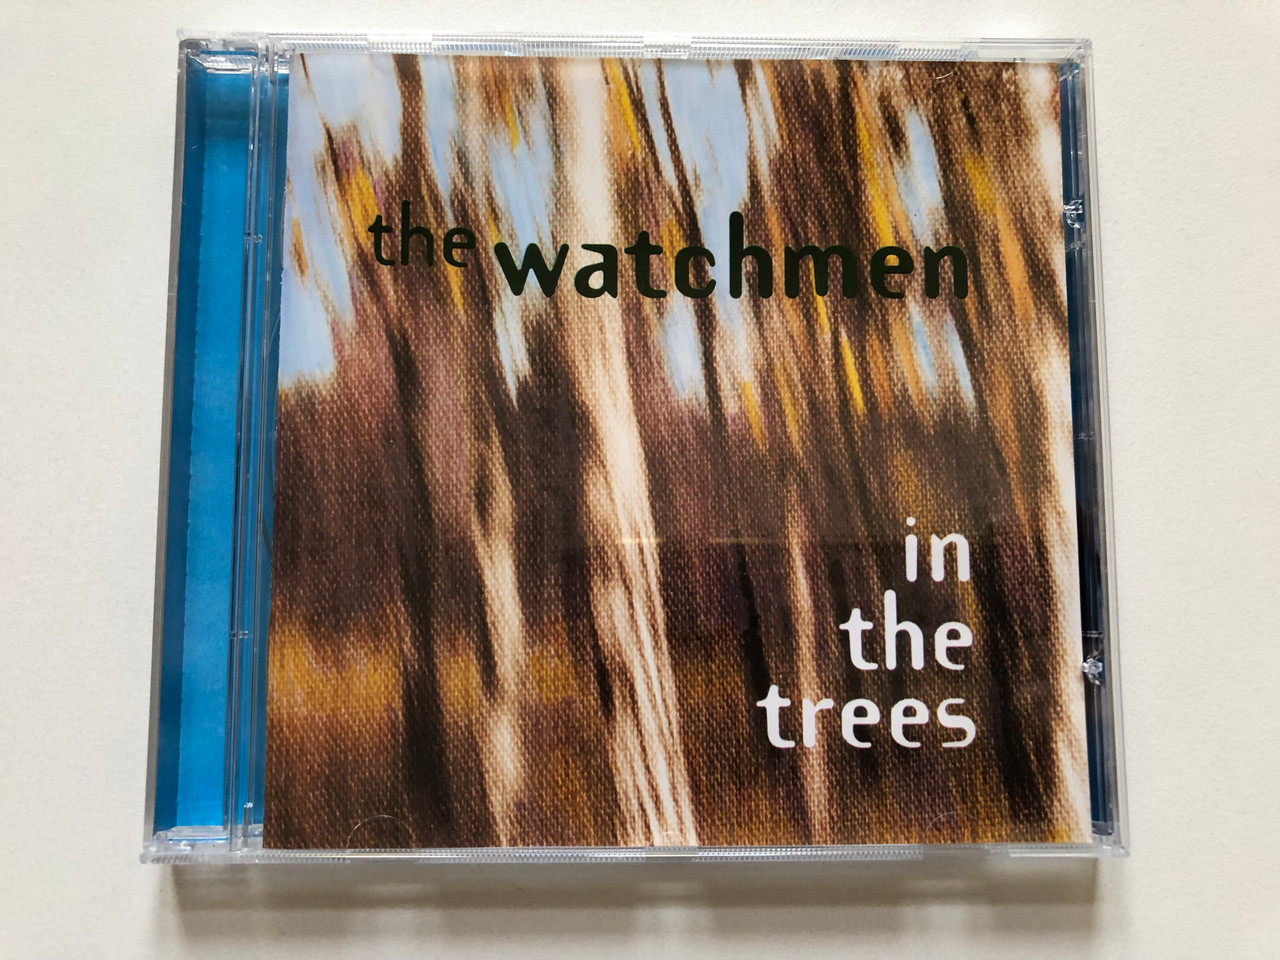 https://cdn10.bigcommerce.com/s-62bdpkt7pb/products/0/images/313294/The_Watchmen_In_The_Trees_MCA_Records_Audio_CD_1994_MCD_11105_1__07912.1700664715.1280.1280.JPG?c=2